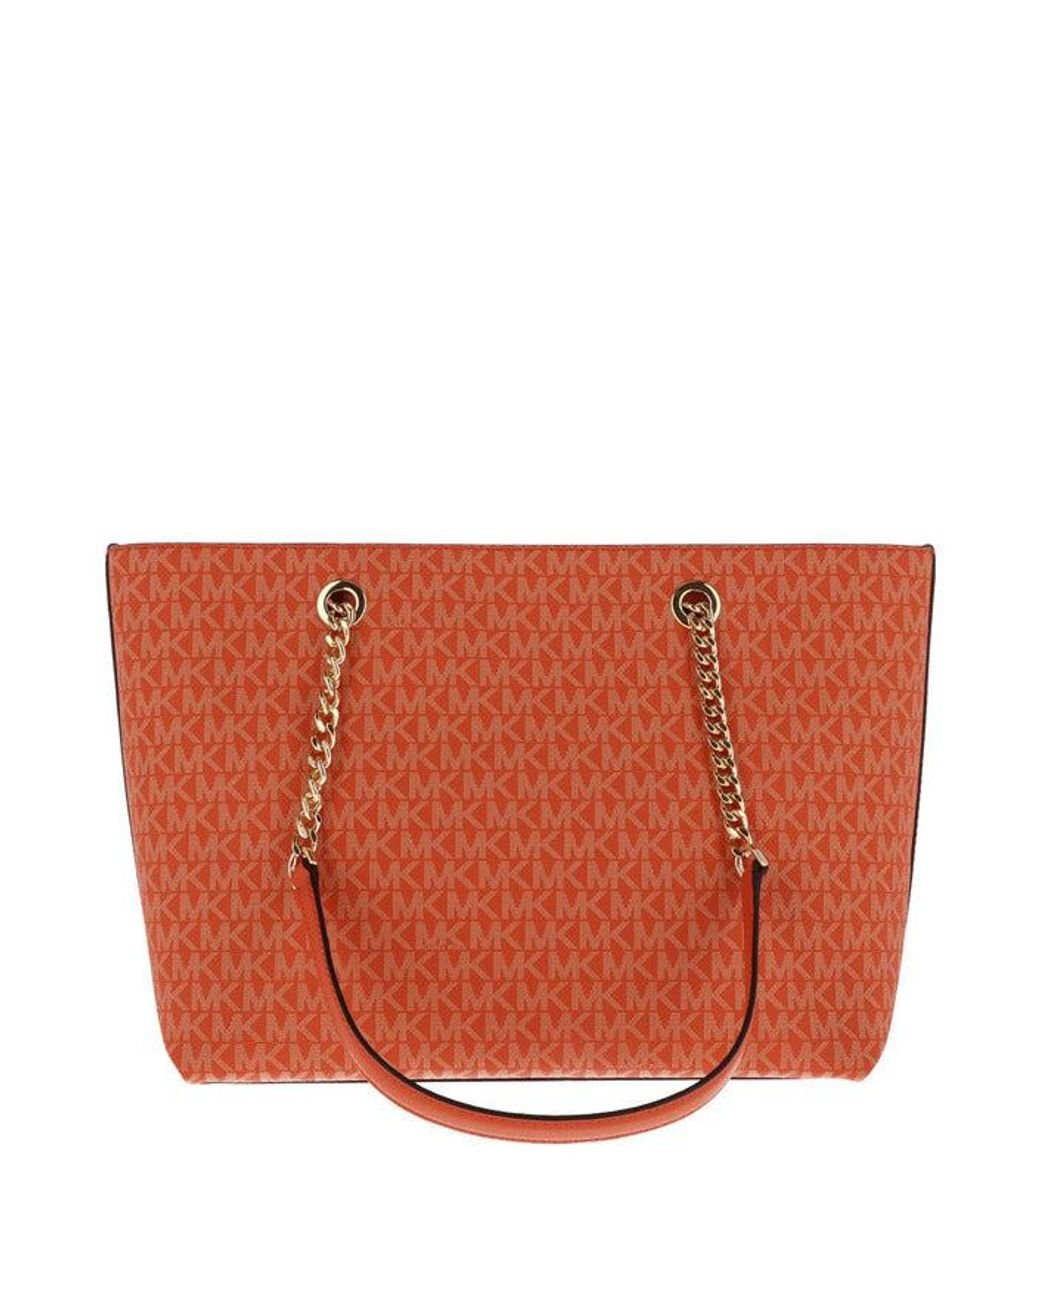 Michael Kors Jet Set XS Tote: Shop the best MK purse deals this January -  Reviewed